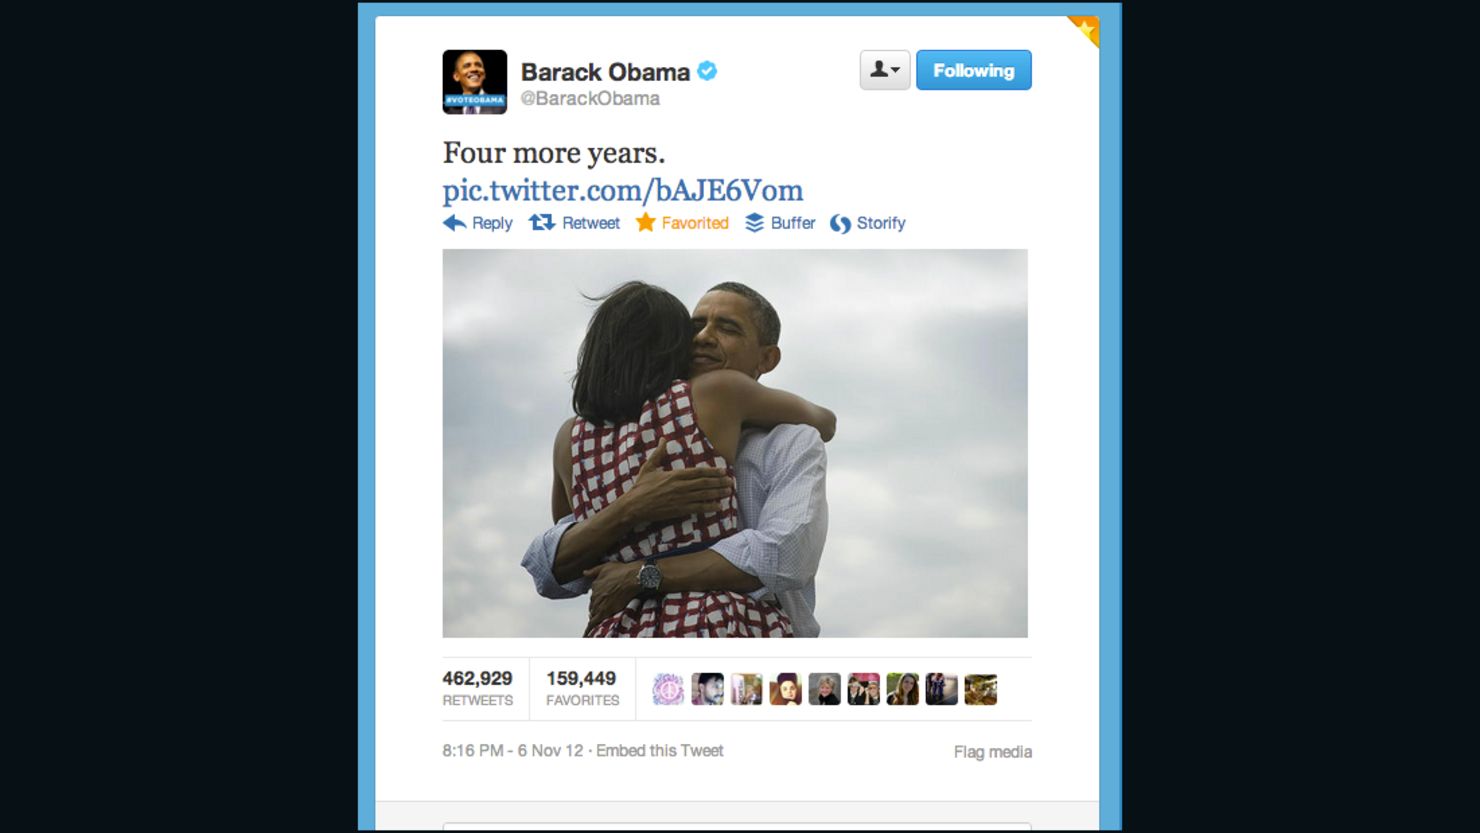 This tweet by @BarackObama quickly became the most retweeted message ever on Twitter.